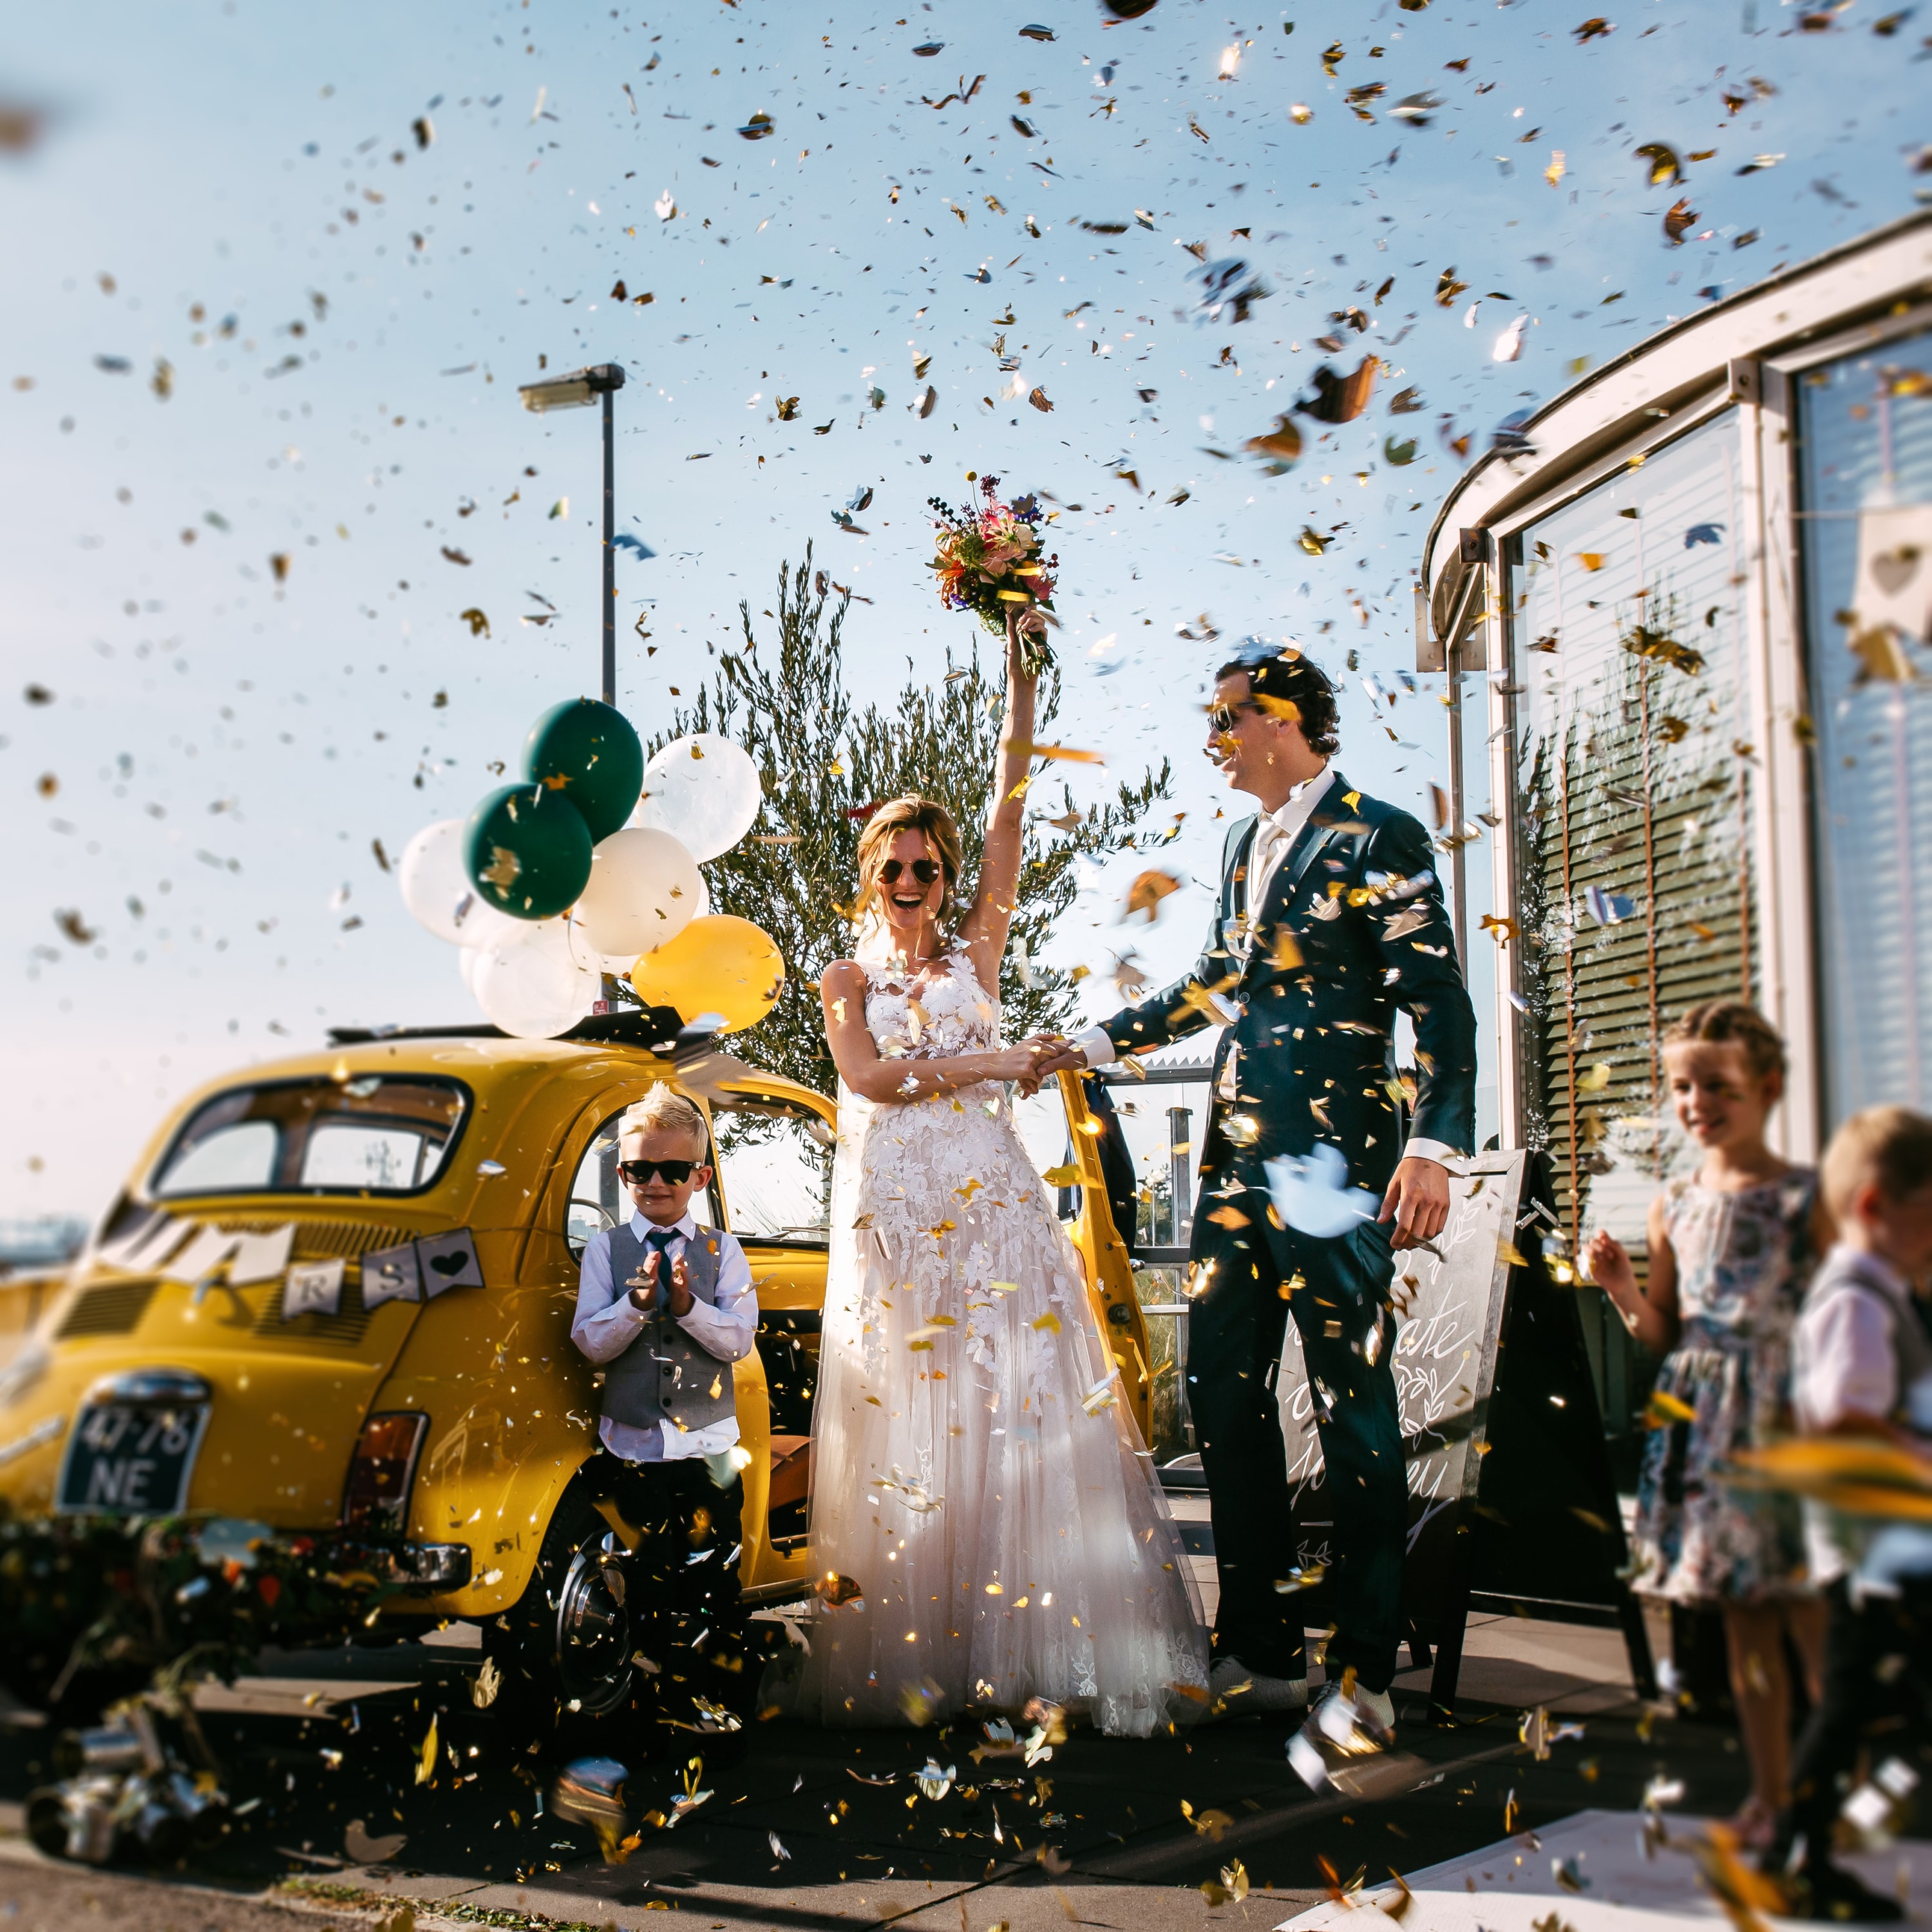 A bride and groom are surrounded by confetti at their wedding at the mine torpedo shed in corner of holland